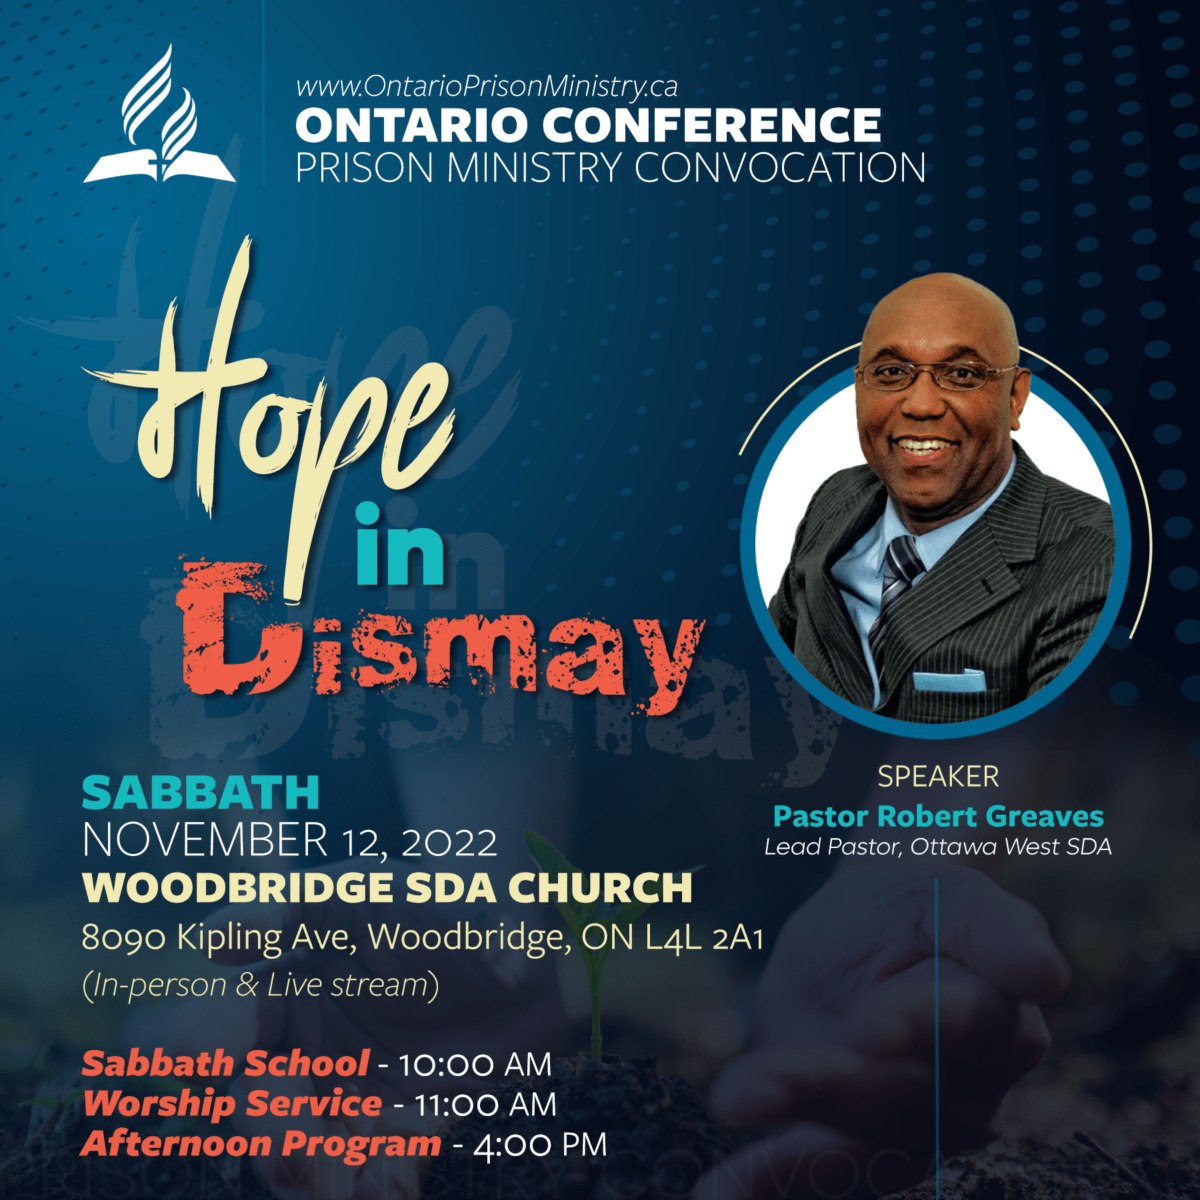 Ontario Conference Prison Ministry Convocation 2022